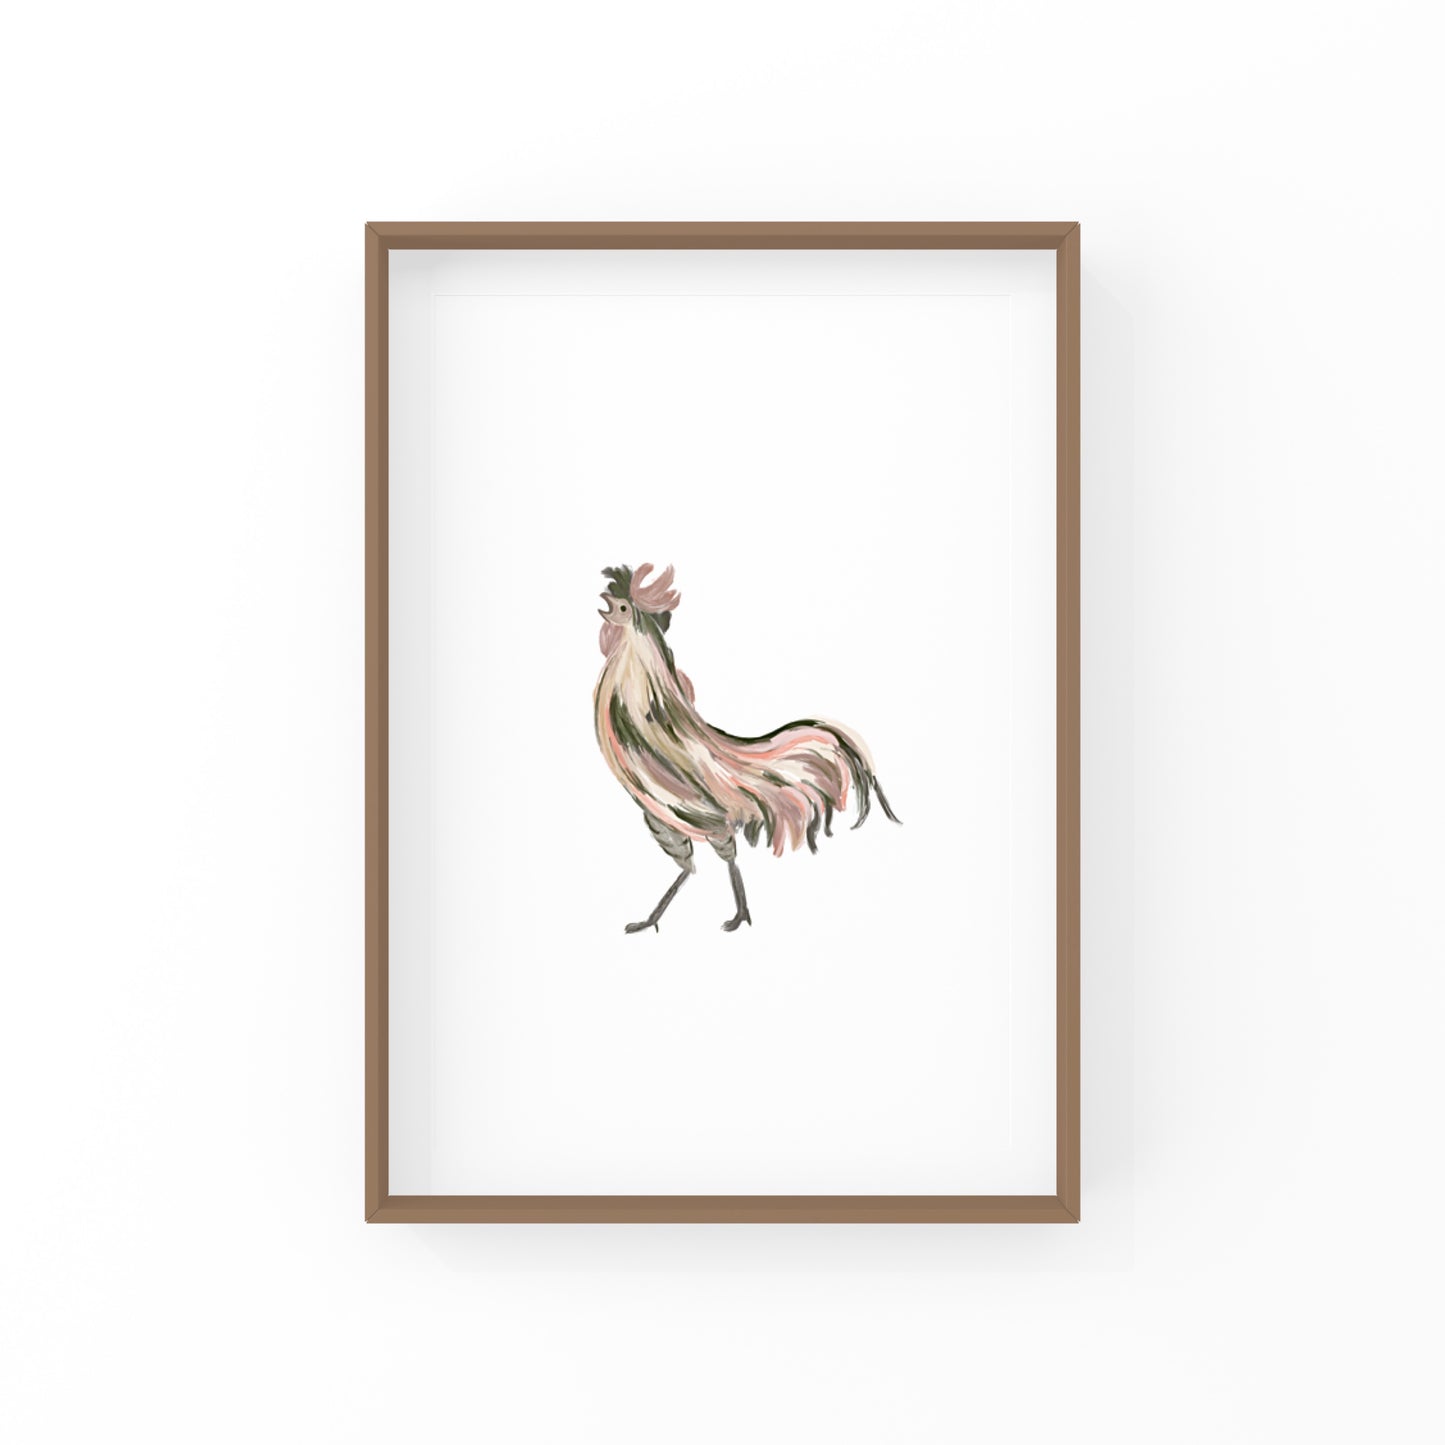 This art print is the perfect way to bring those southern vibes into your home! Featuring a beautifully hand-illustrated rooster with shades of green, pink, beige, and brown. Makes perfect home decor, and it would go perfectly above a bar cart or in any gallery wall!